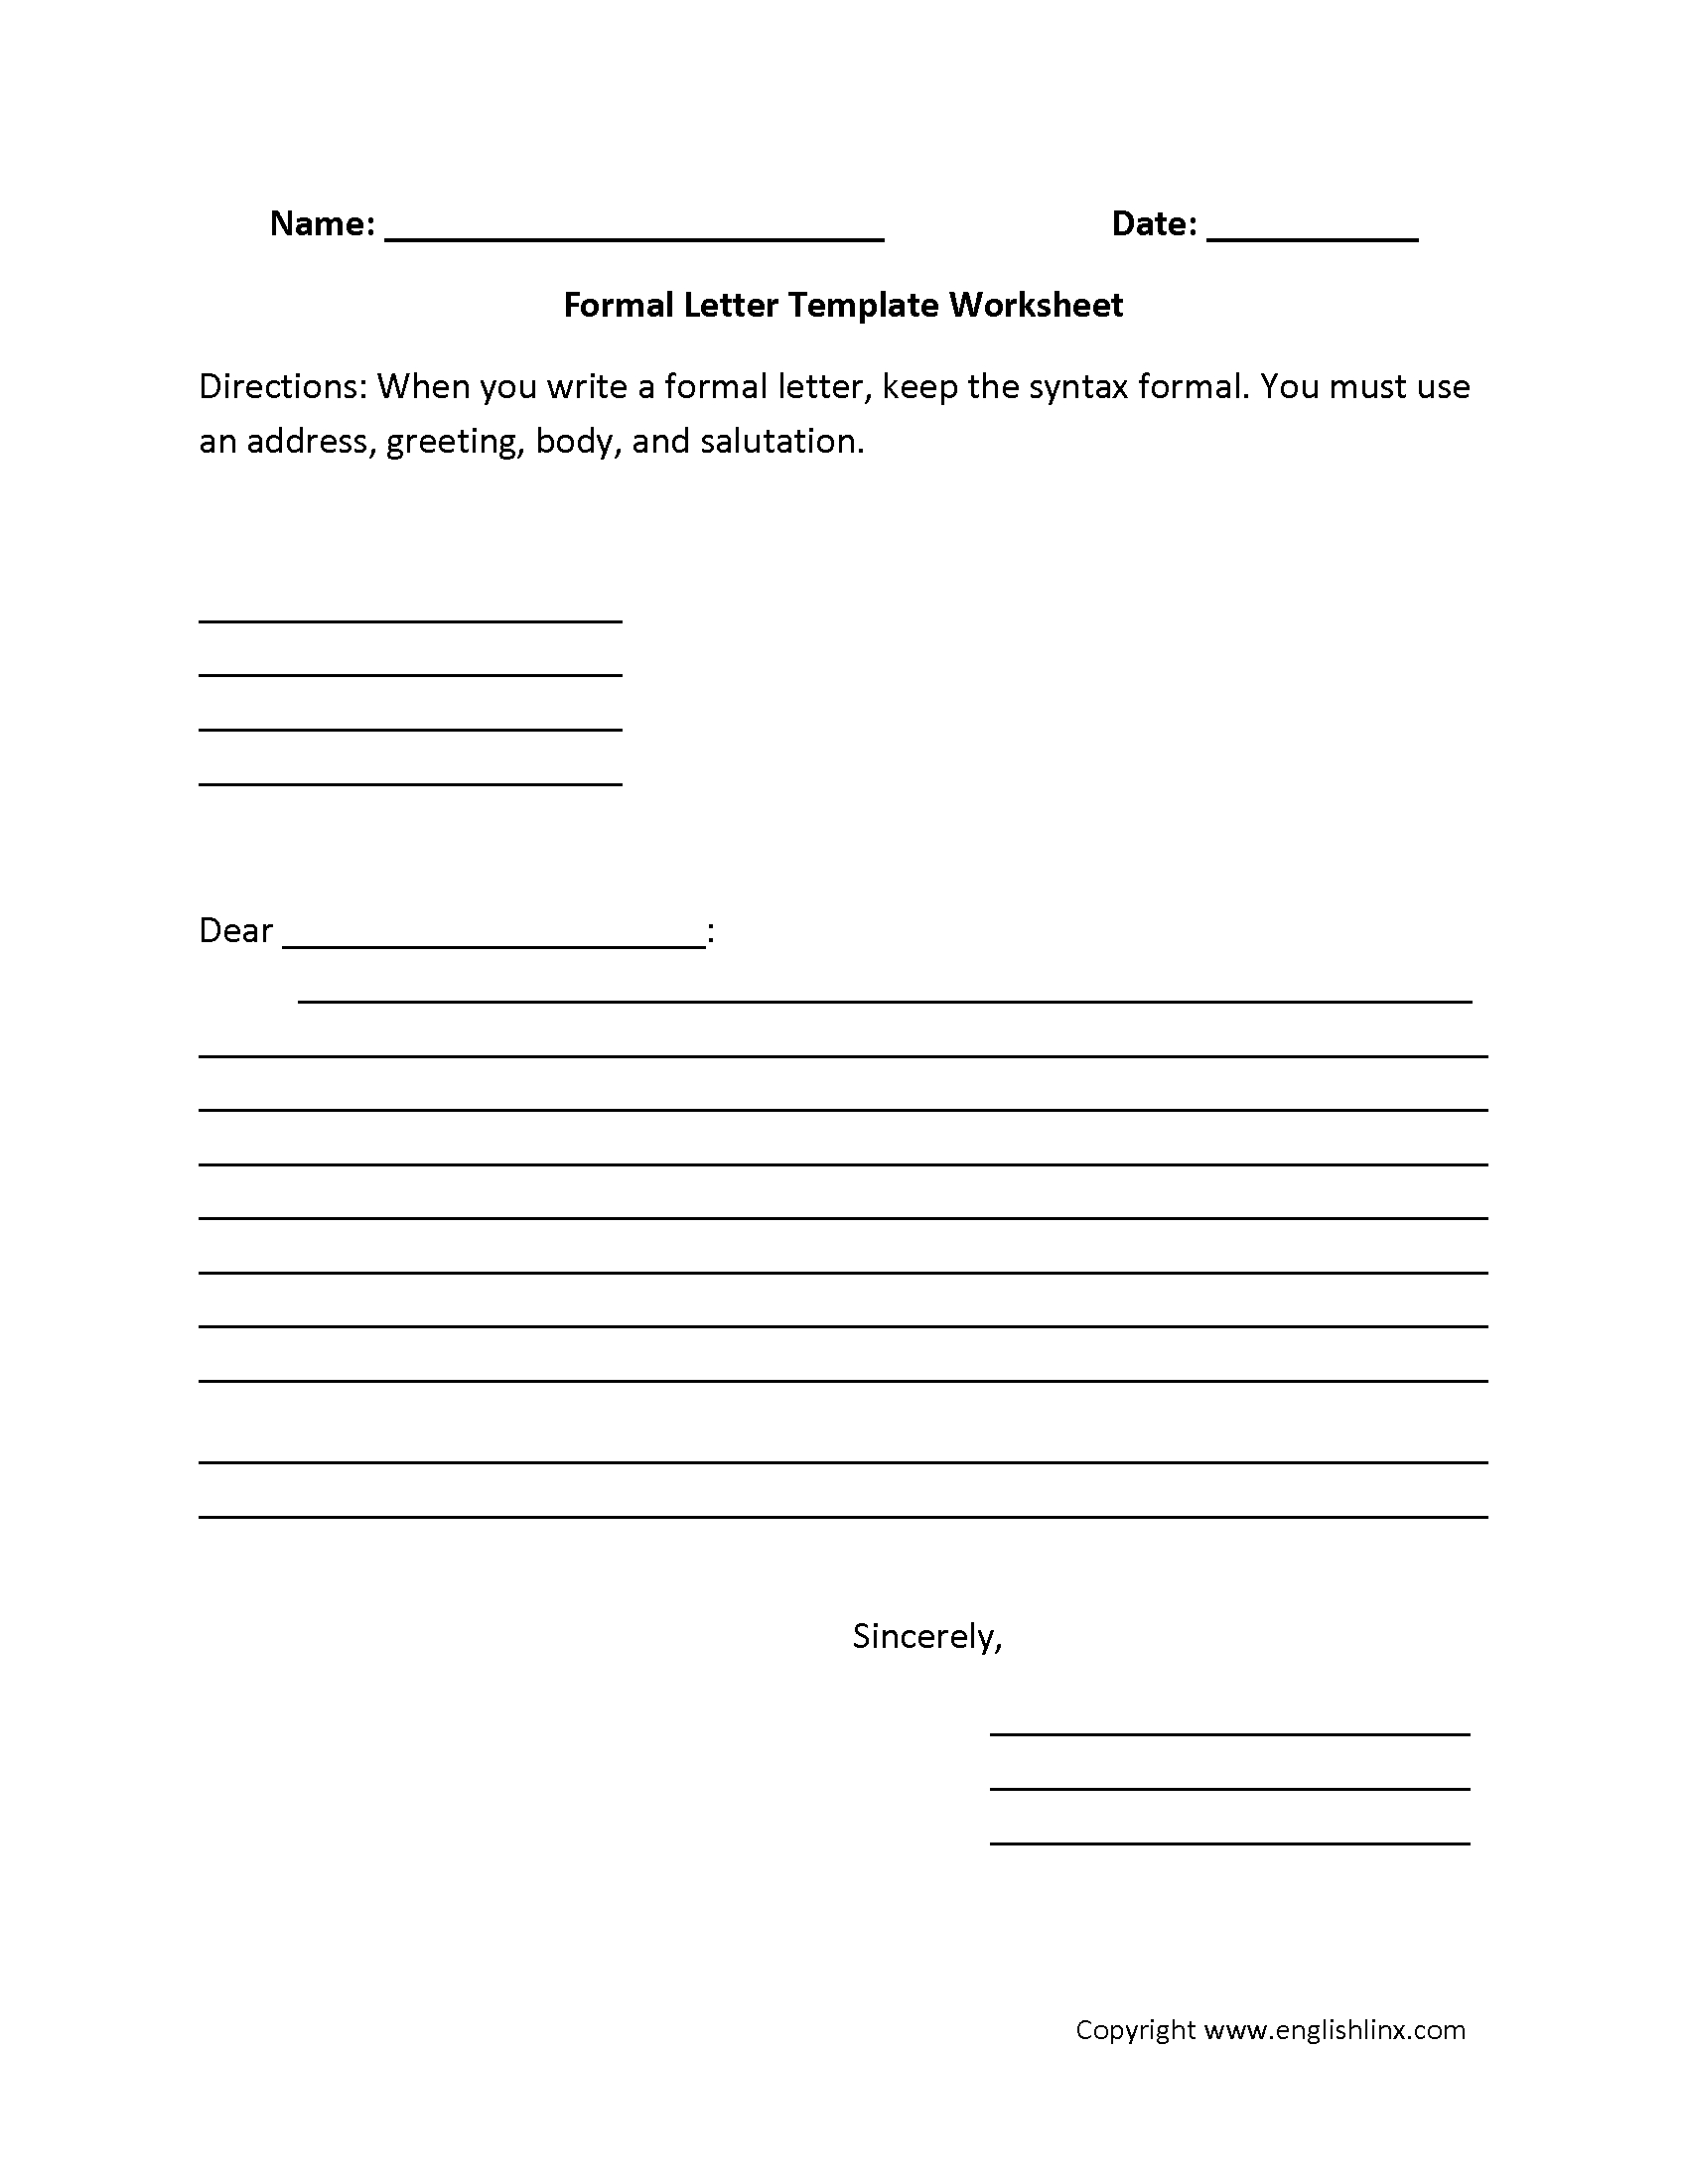 Writing Worksheets | Letter Writing Worksheets - Free Printable Letter Writing Worksheets